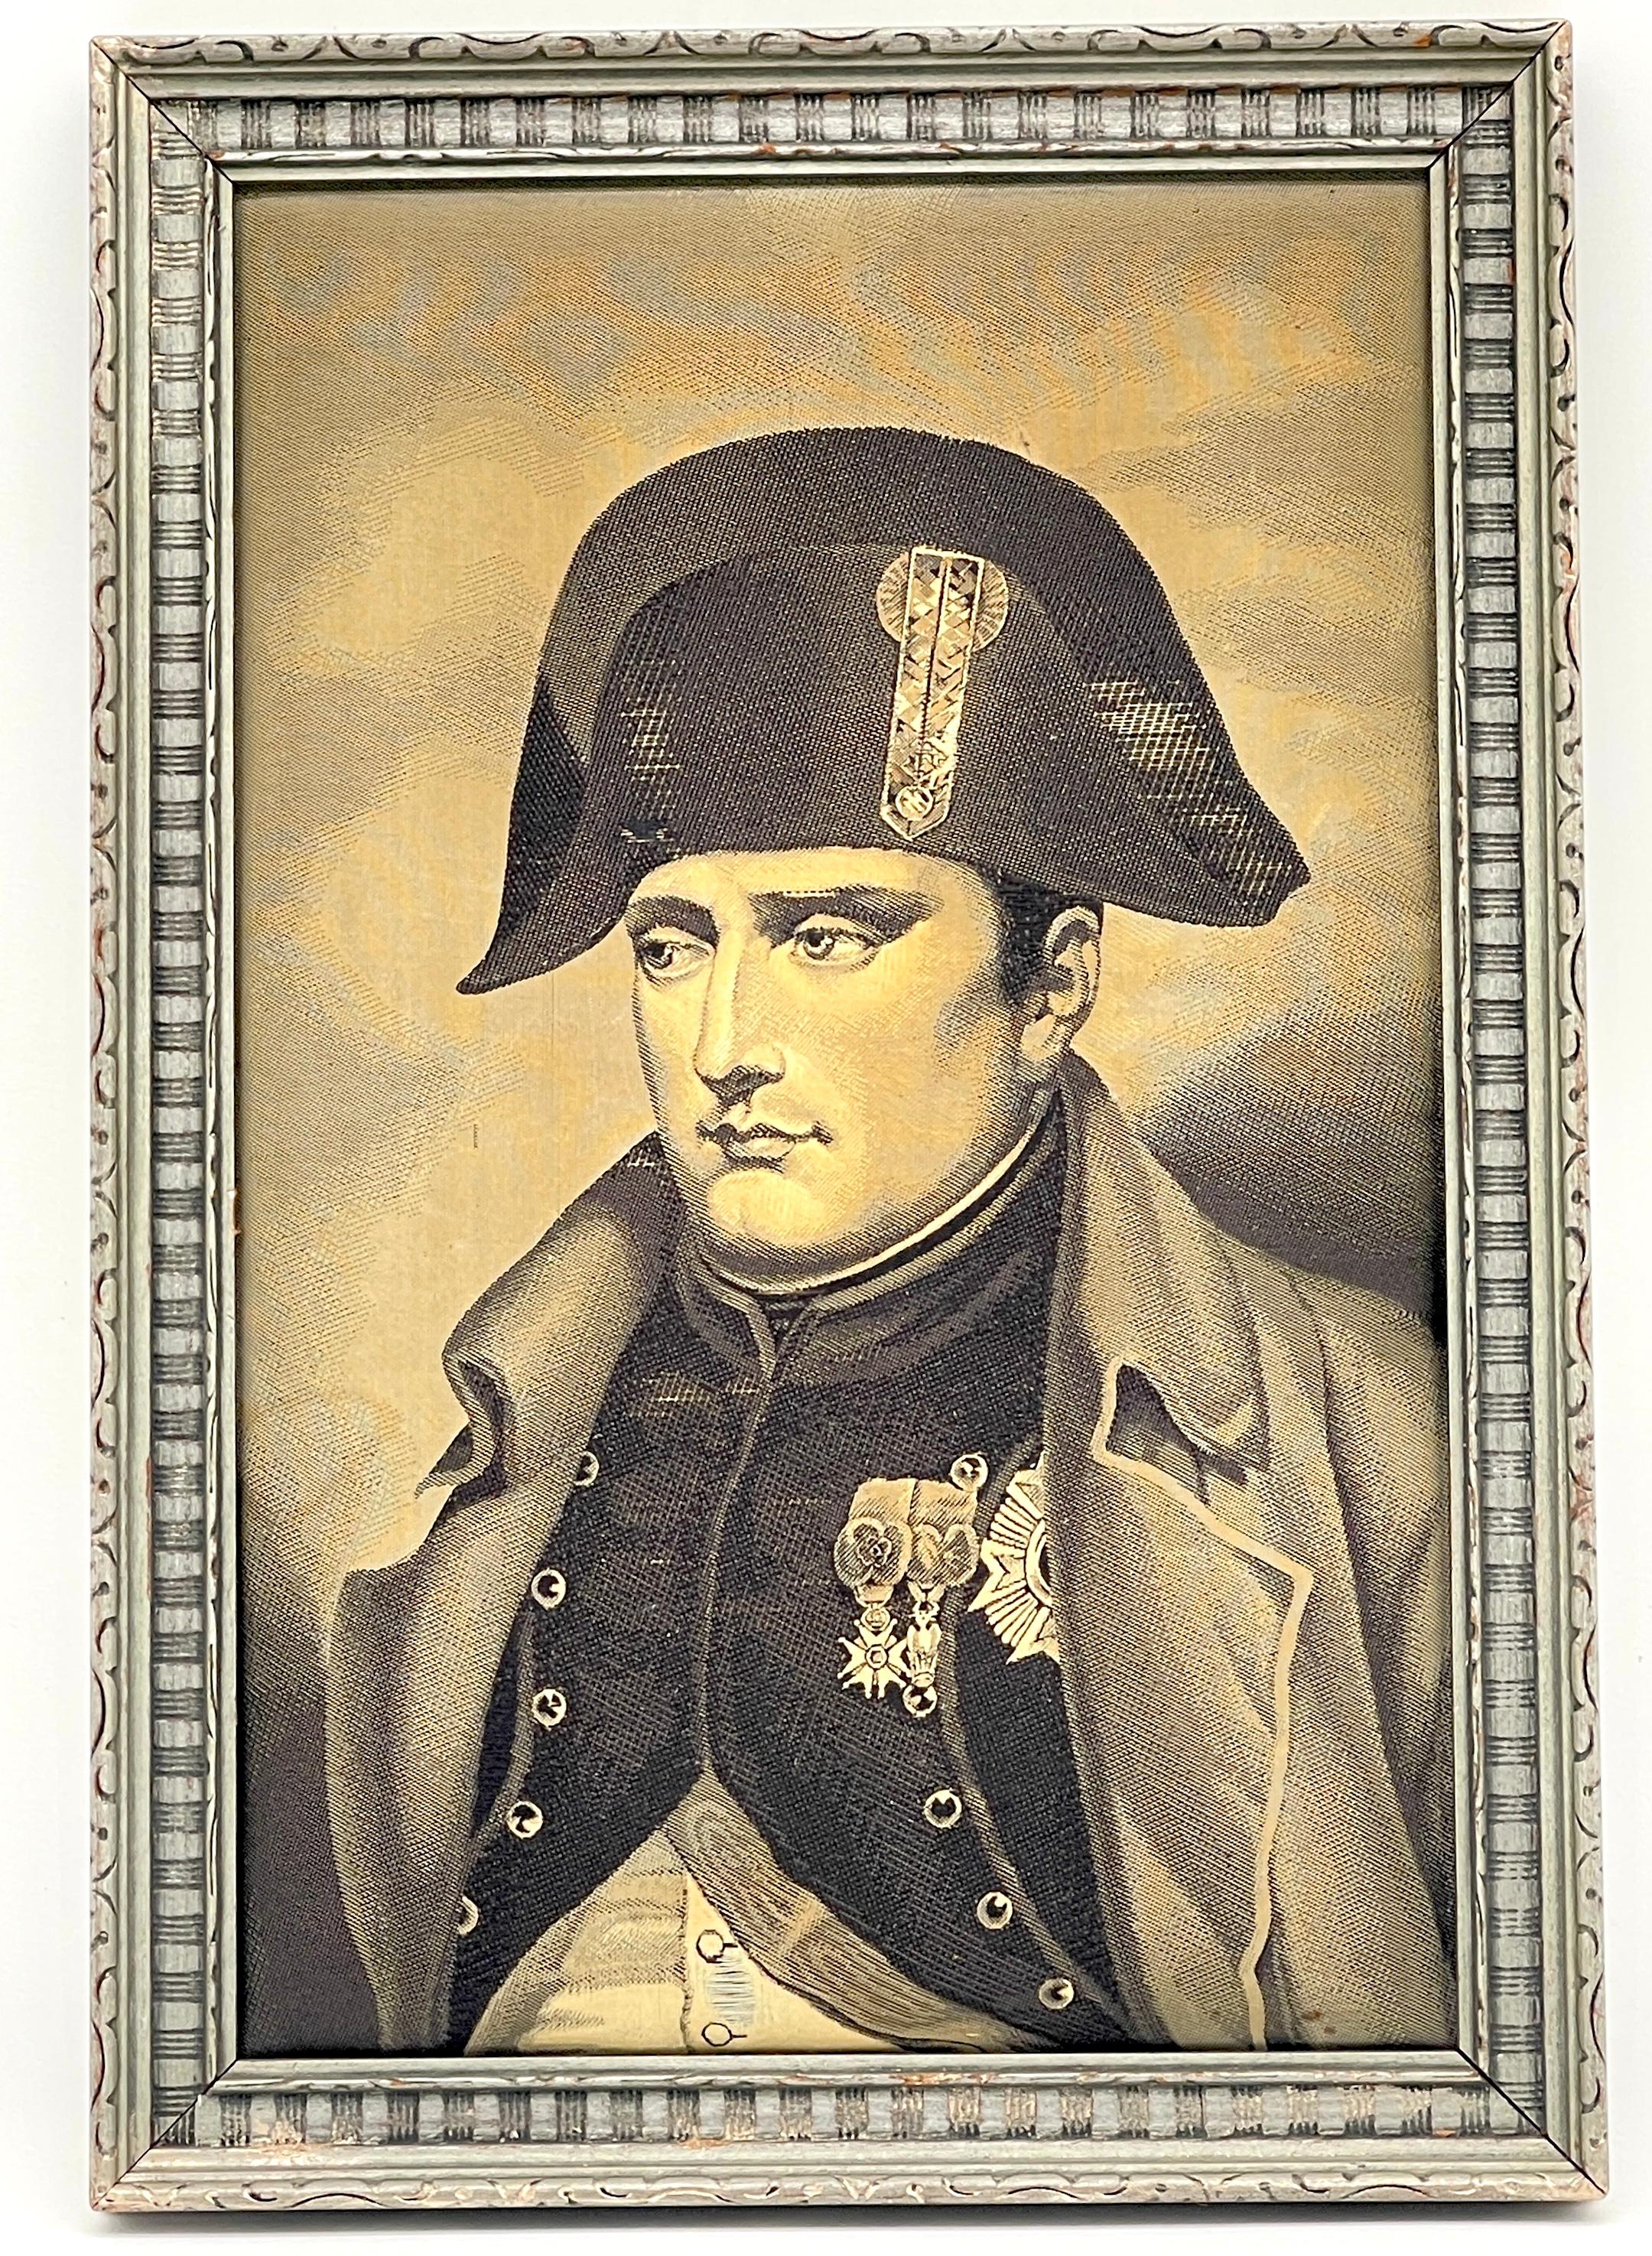 French Grisaille (Grey) Tapestry Portrait of Napoleon Bicorne Hat and Greatcoat
France, circa 1920s 

Capture a piece of French history with this exquisite Grisaille (Grey) Tapestry Portrait of Napoleon, dating back to the 1920s. In this finely